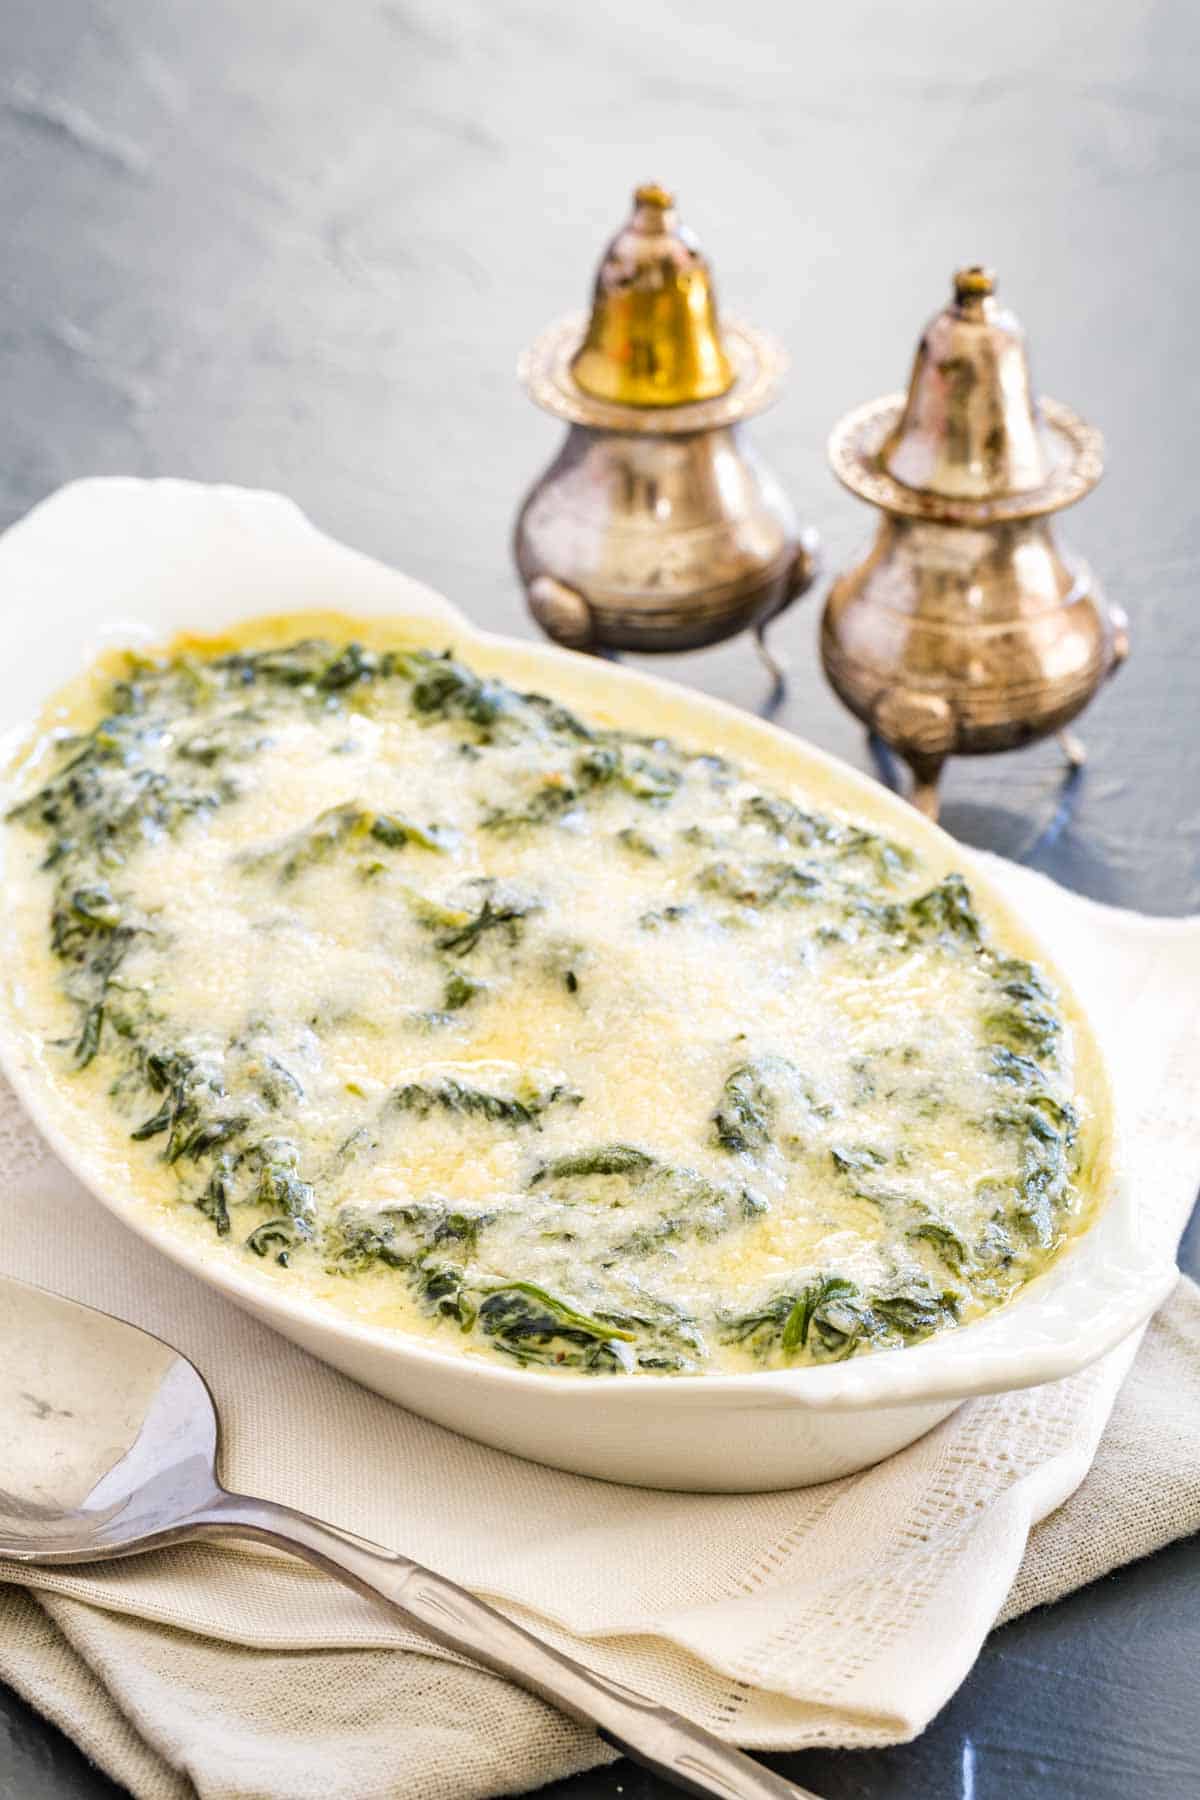 A white oval baking dish is shown full of Parmesan-topped creamed spinach, on a white napkin with serving utensils and metal salt and pepper shakers next to it.